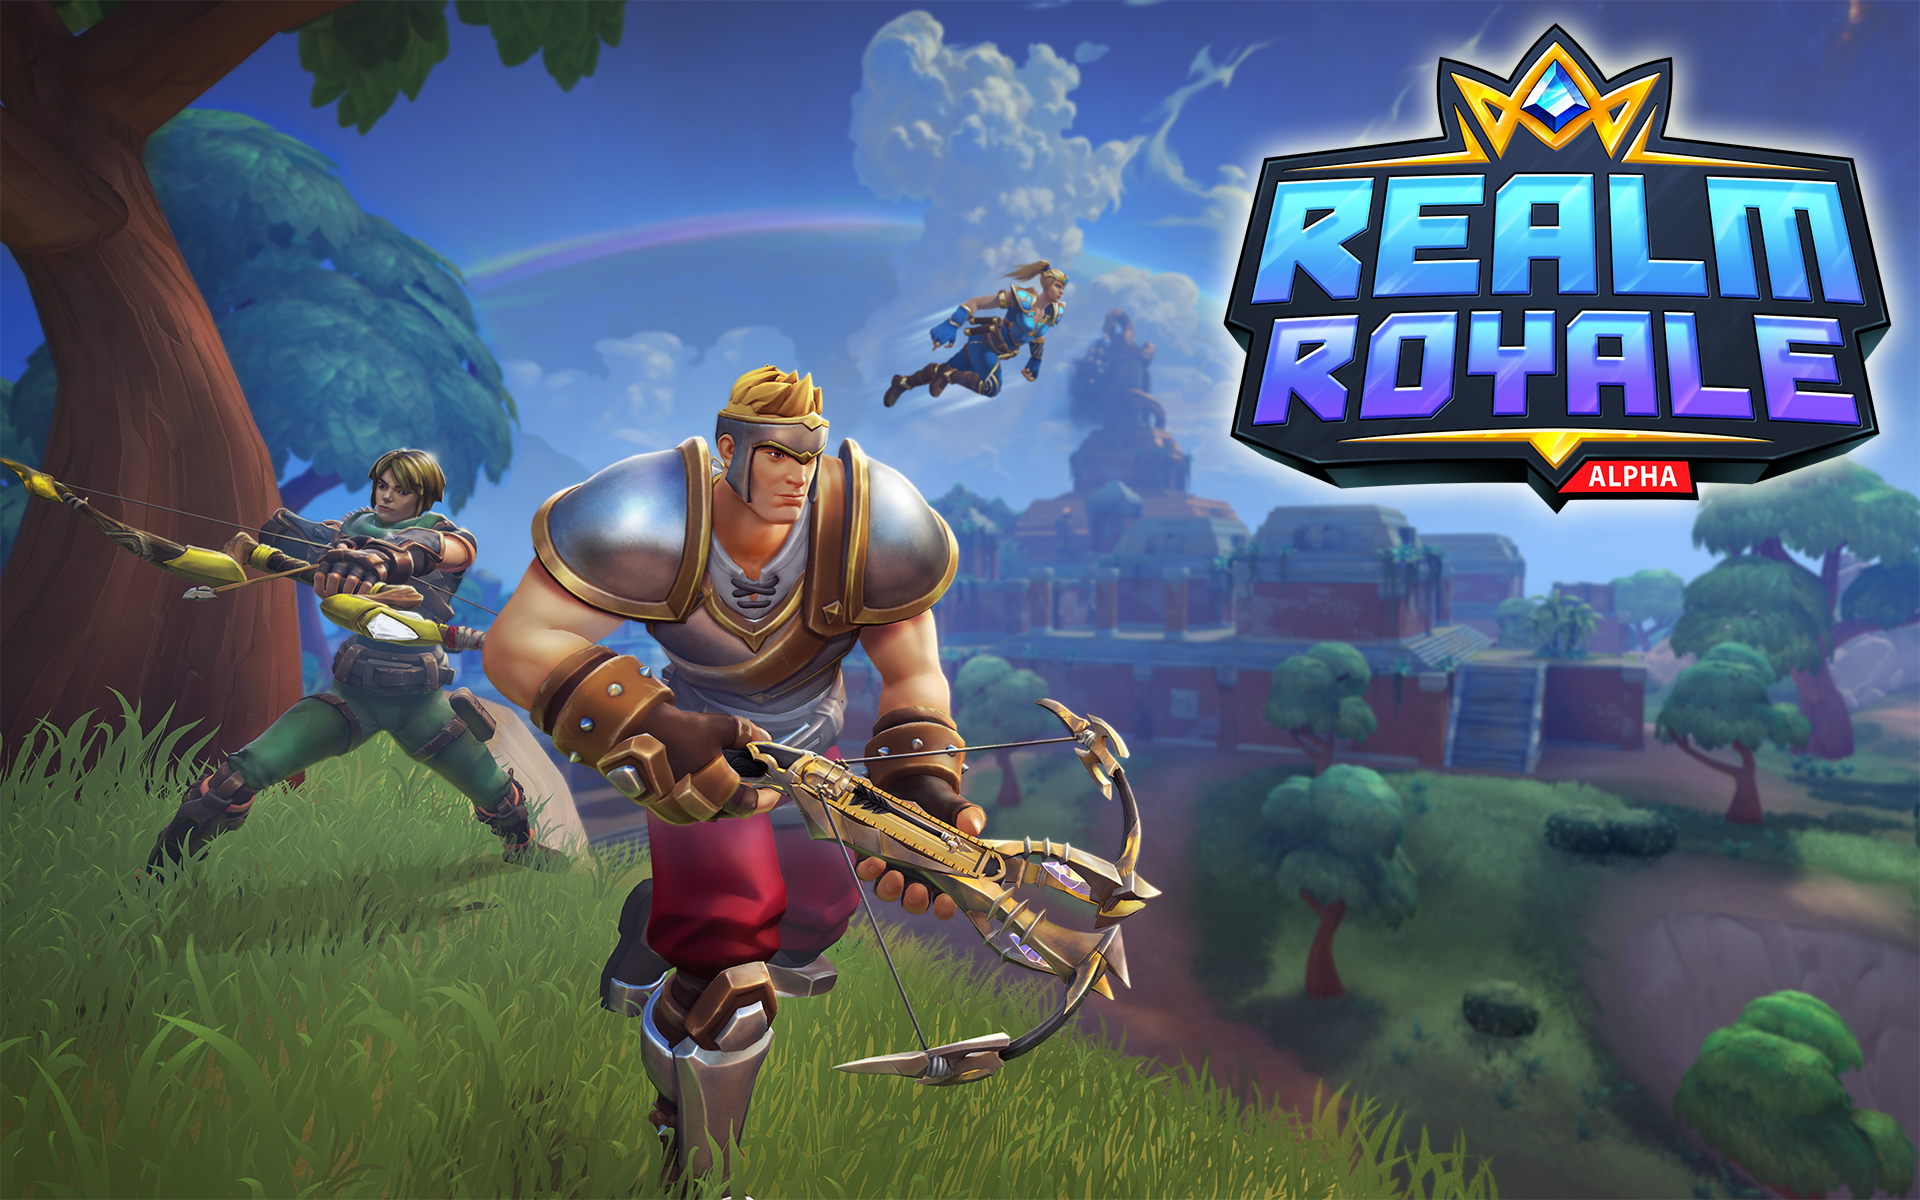 patch notes realm royale